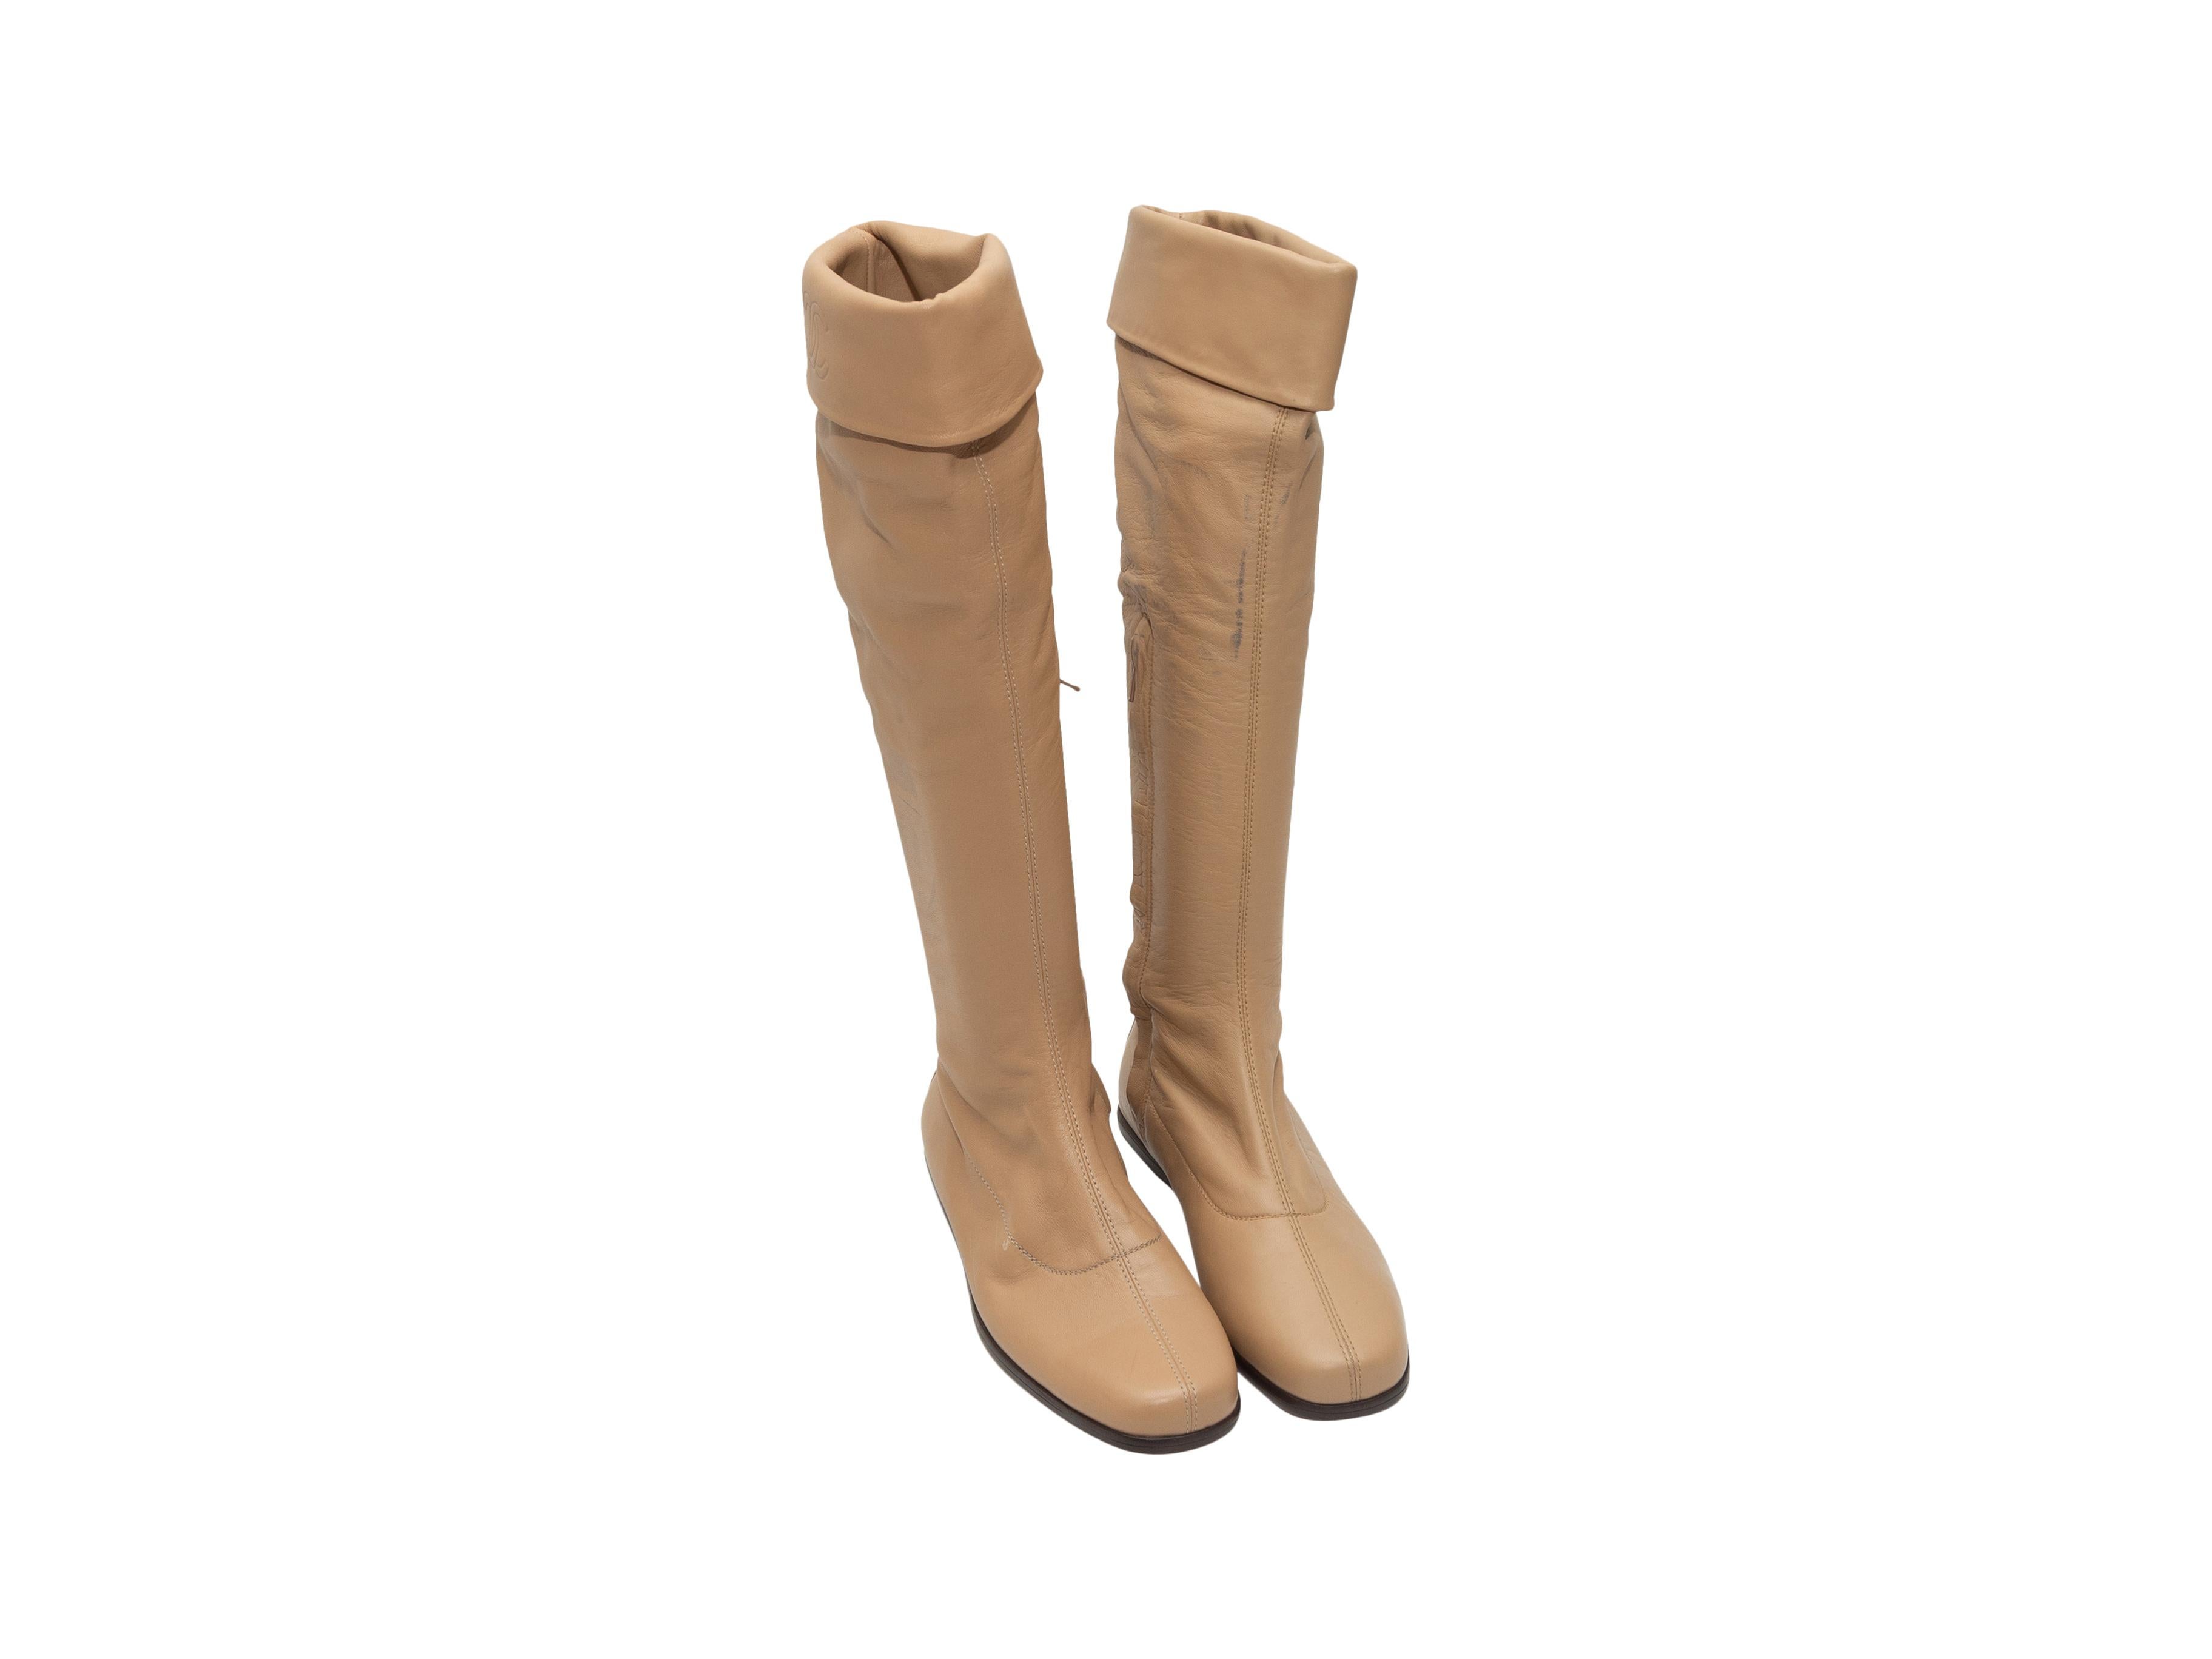 Product details: Tan leather knee-high boots by Chanel. Embossed CCs at outer tops. Zip closures at inner sides. Designer size 36. 0.5